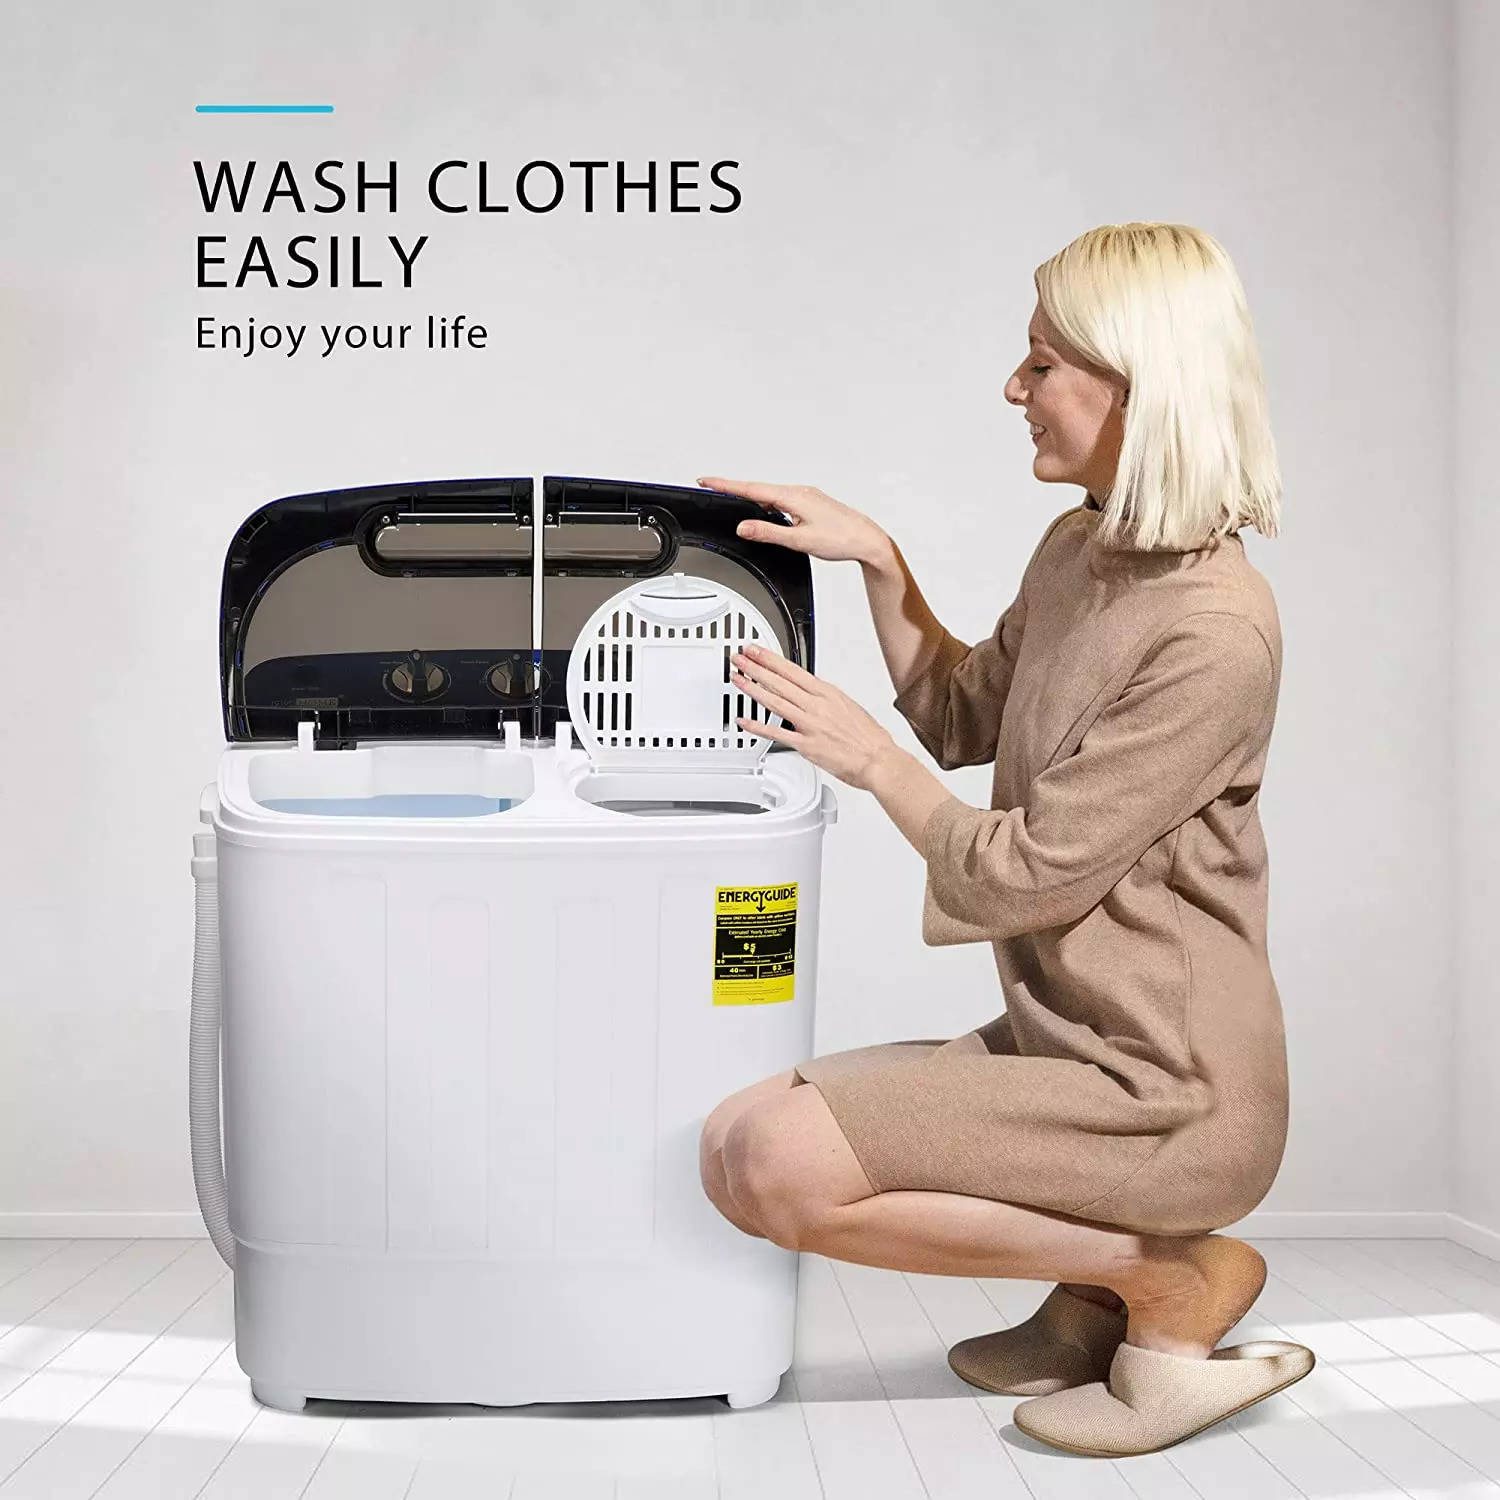  Panda Portable Washing Machine 10 LBS Load Volume, Fully  Automatic 1.34 Cuft Laundry Washer